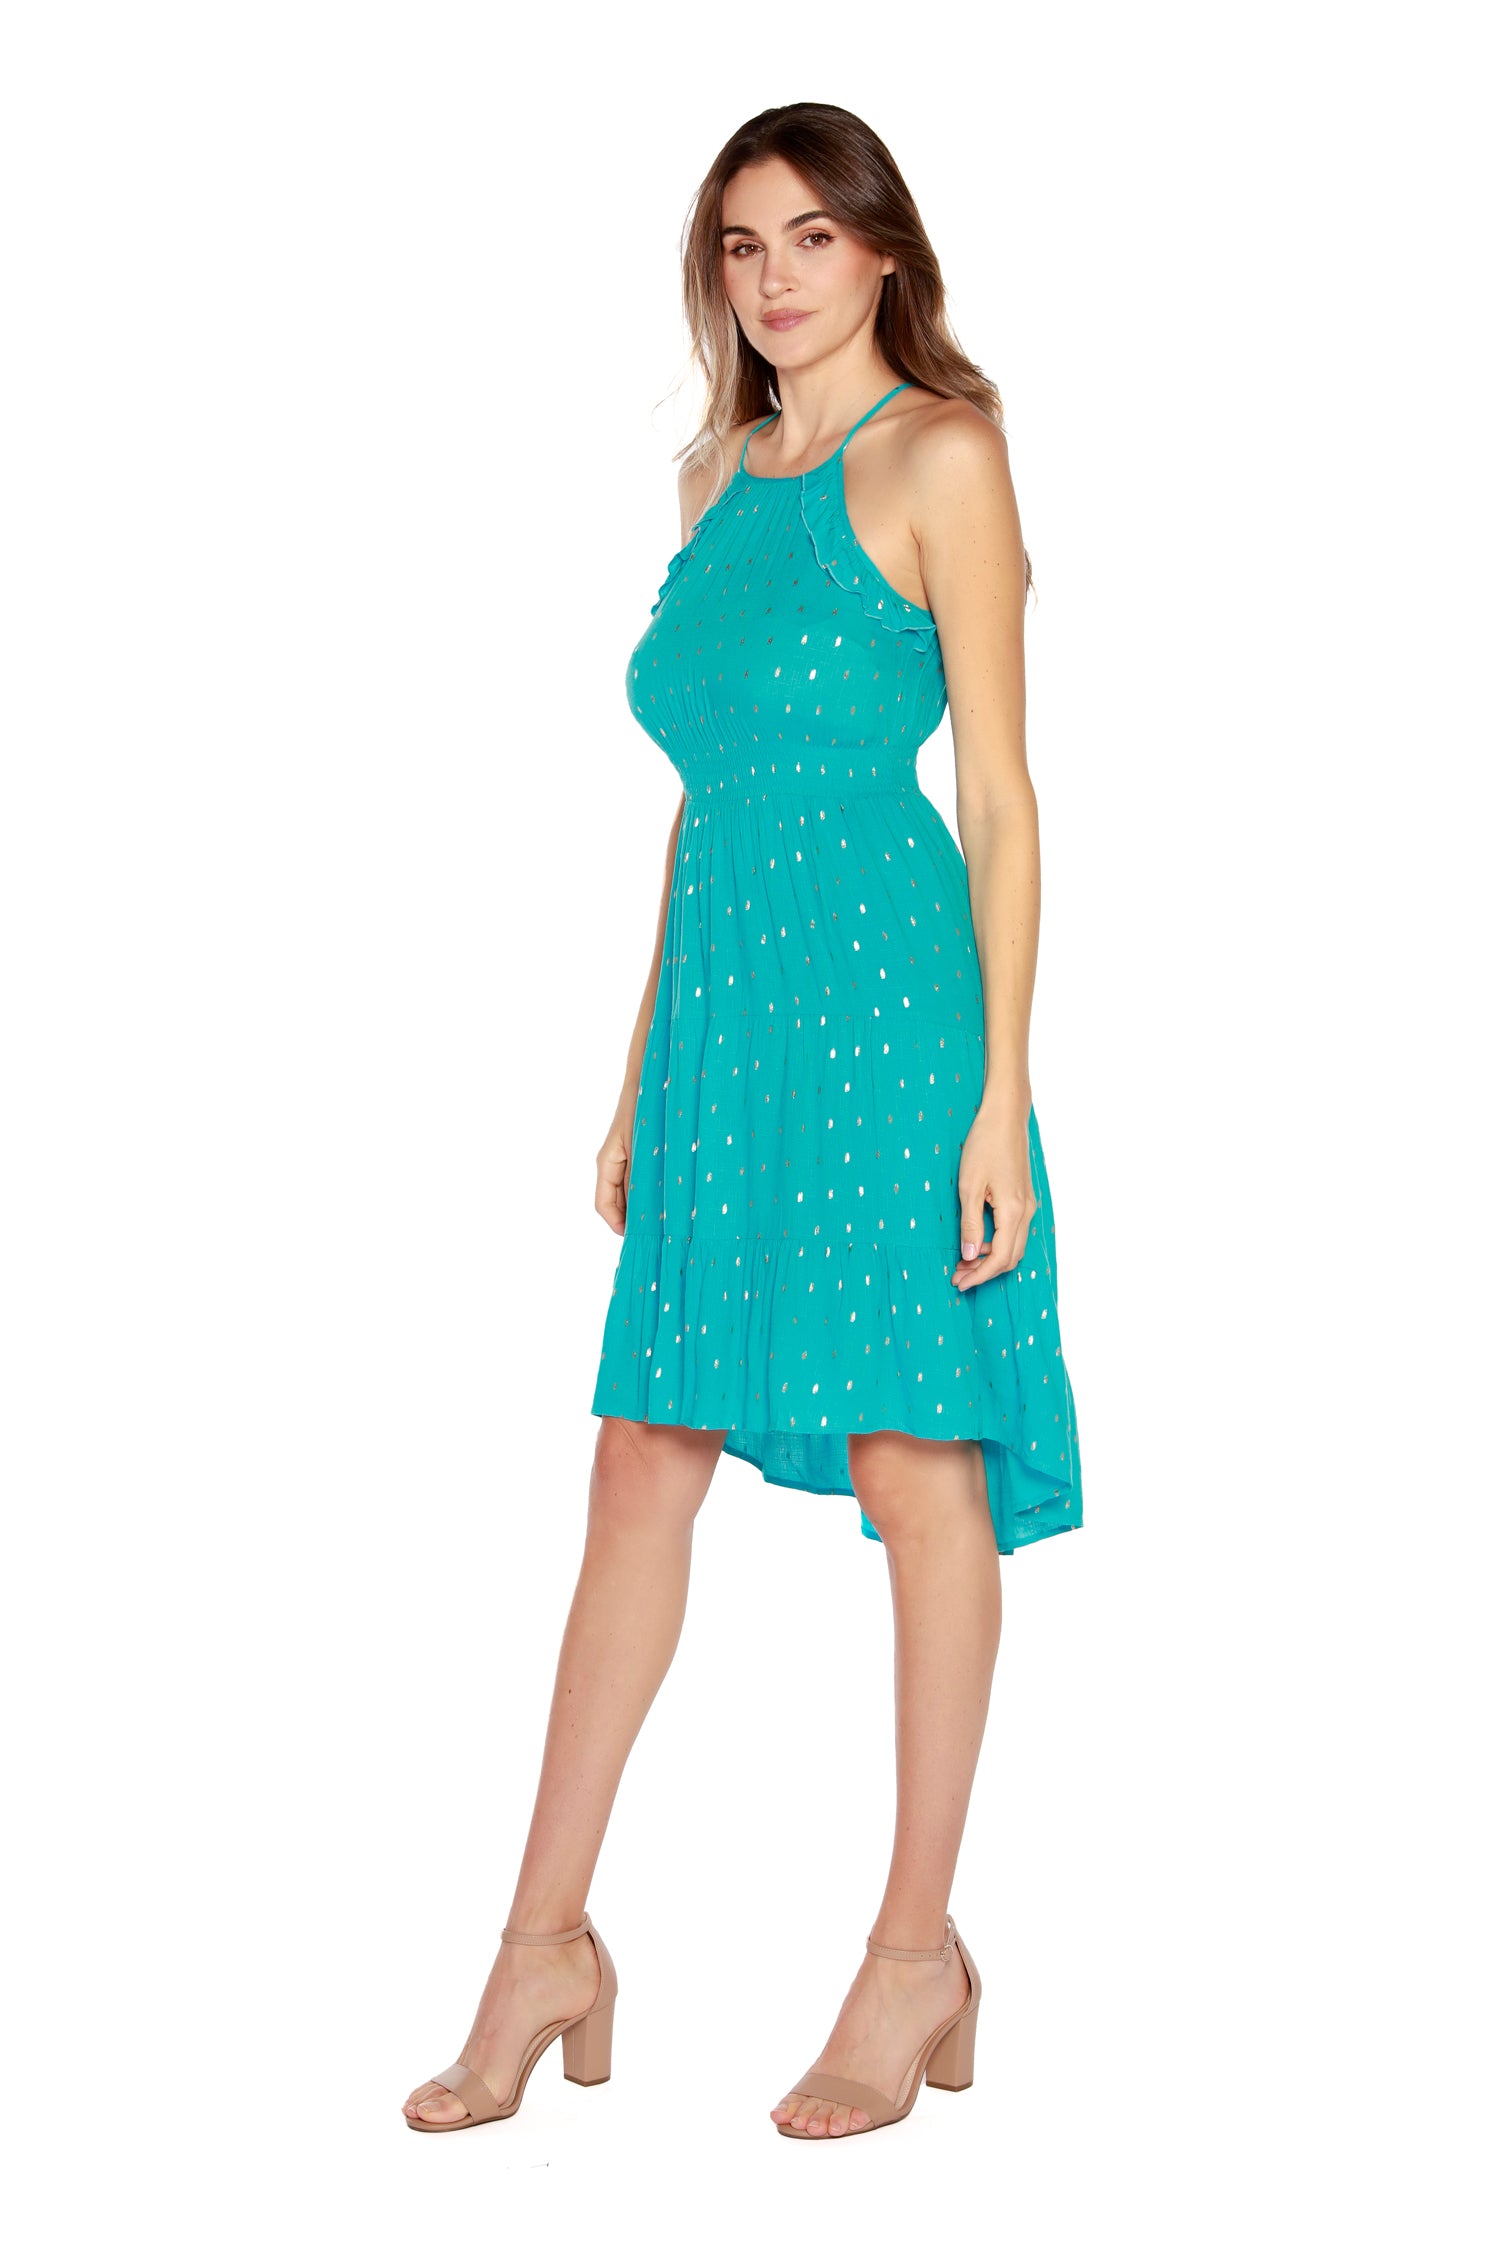 Women’s Sleeveless Dress with Tiered Skirt and High-Low Hem